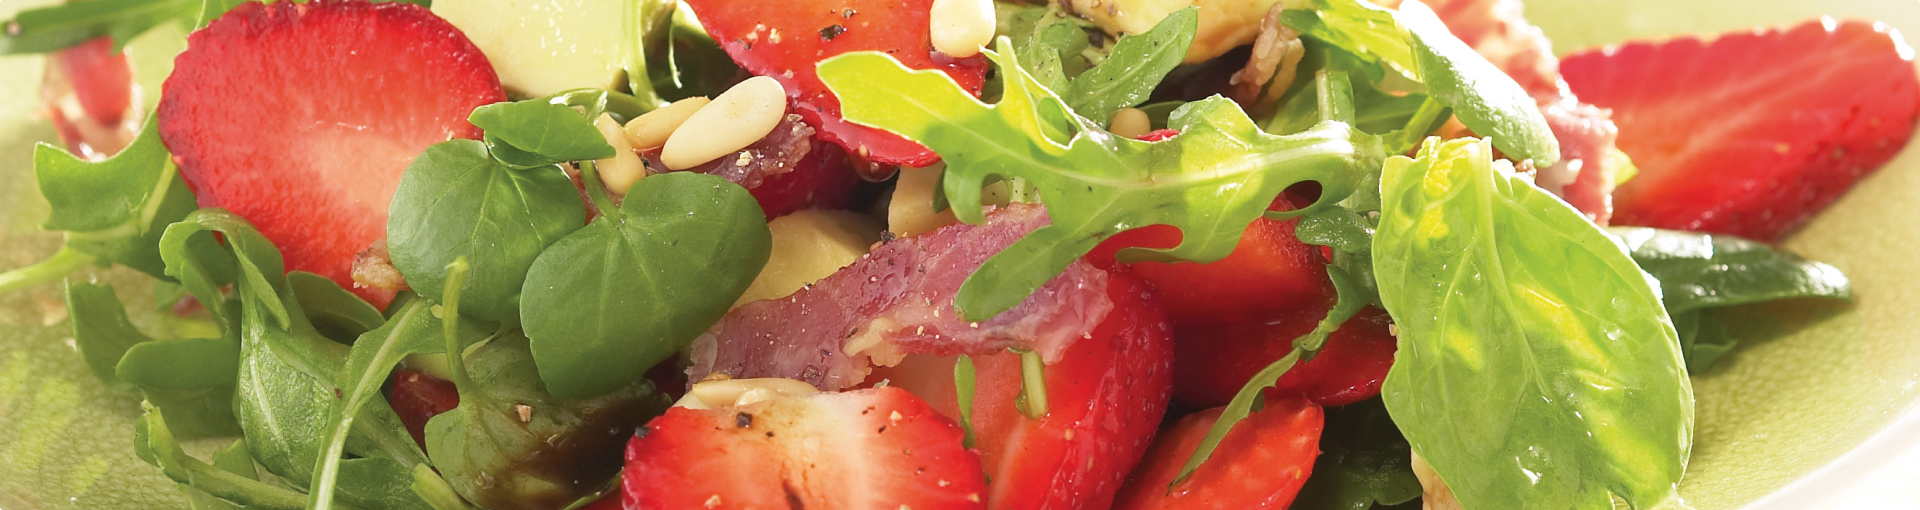 Biltong & Strawberry Salad with Brie